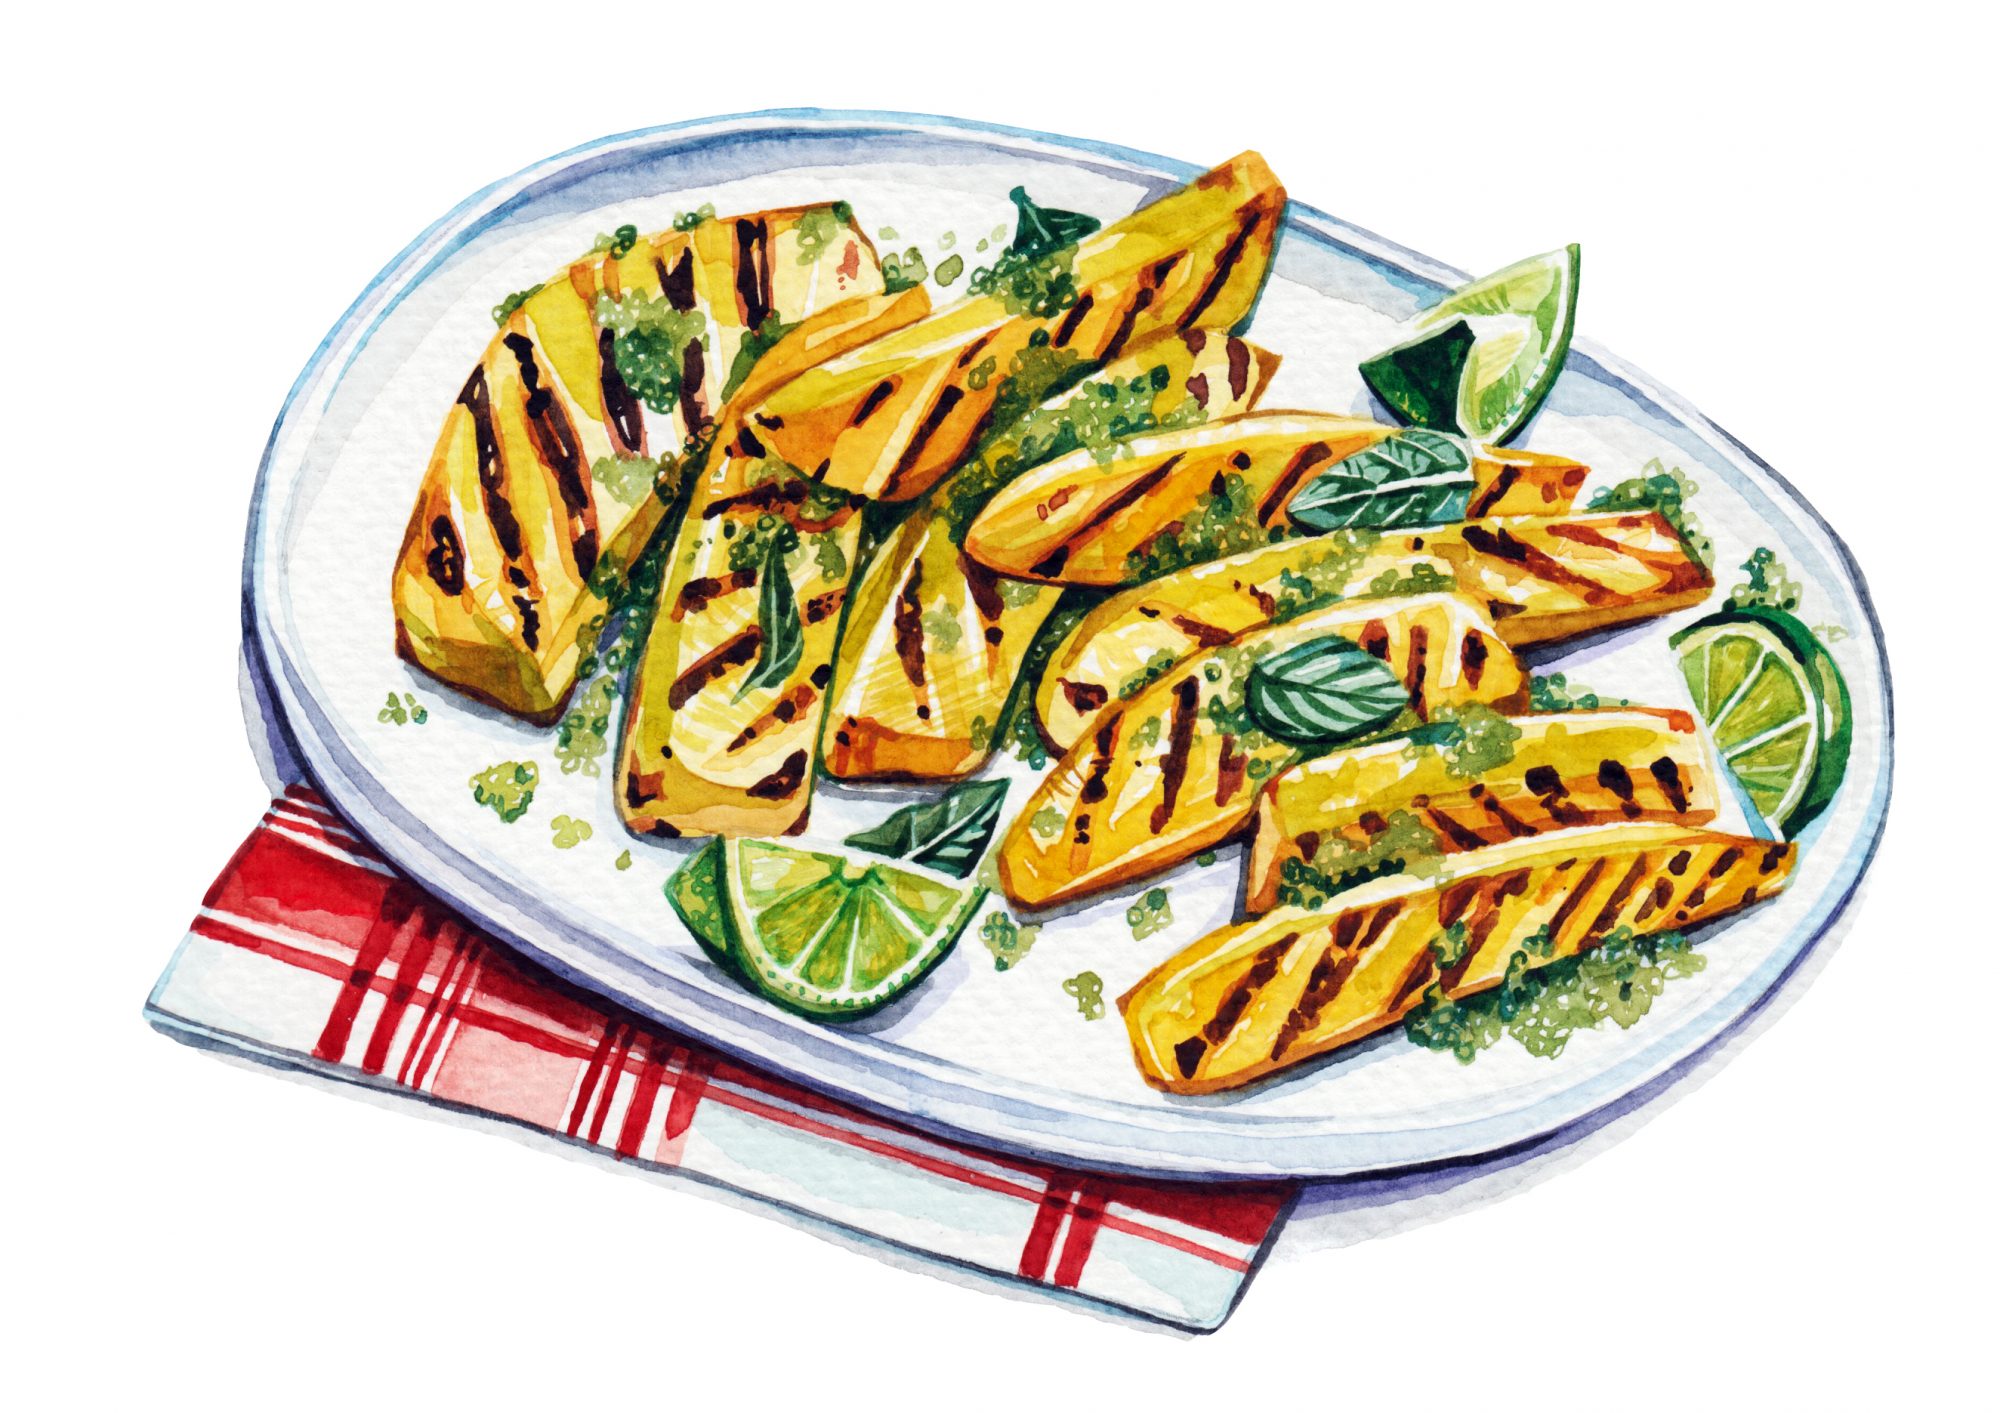 Grilled Pineapple with Mint Sugar